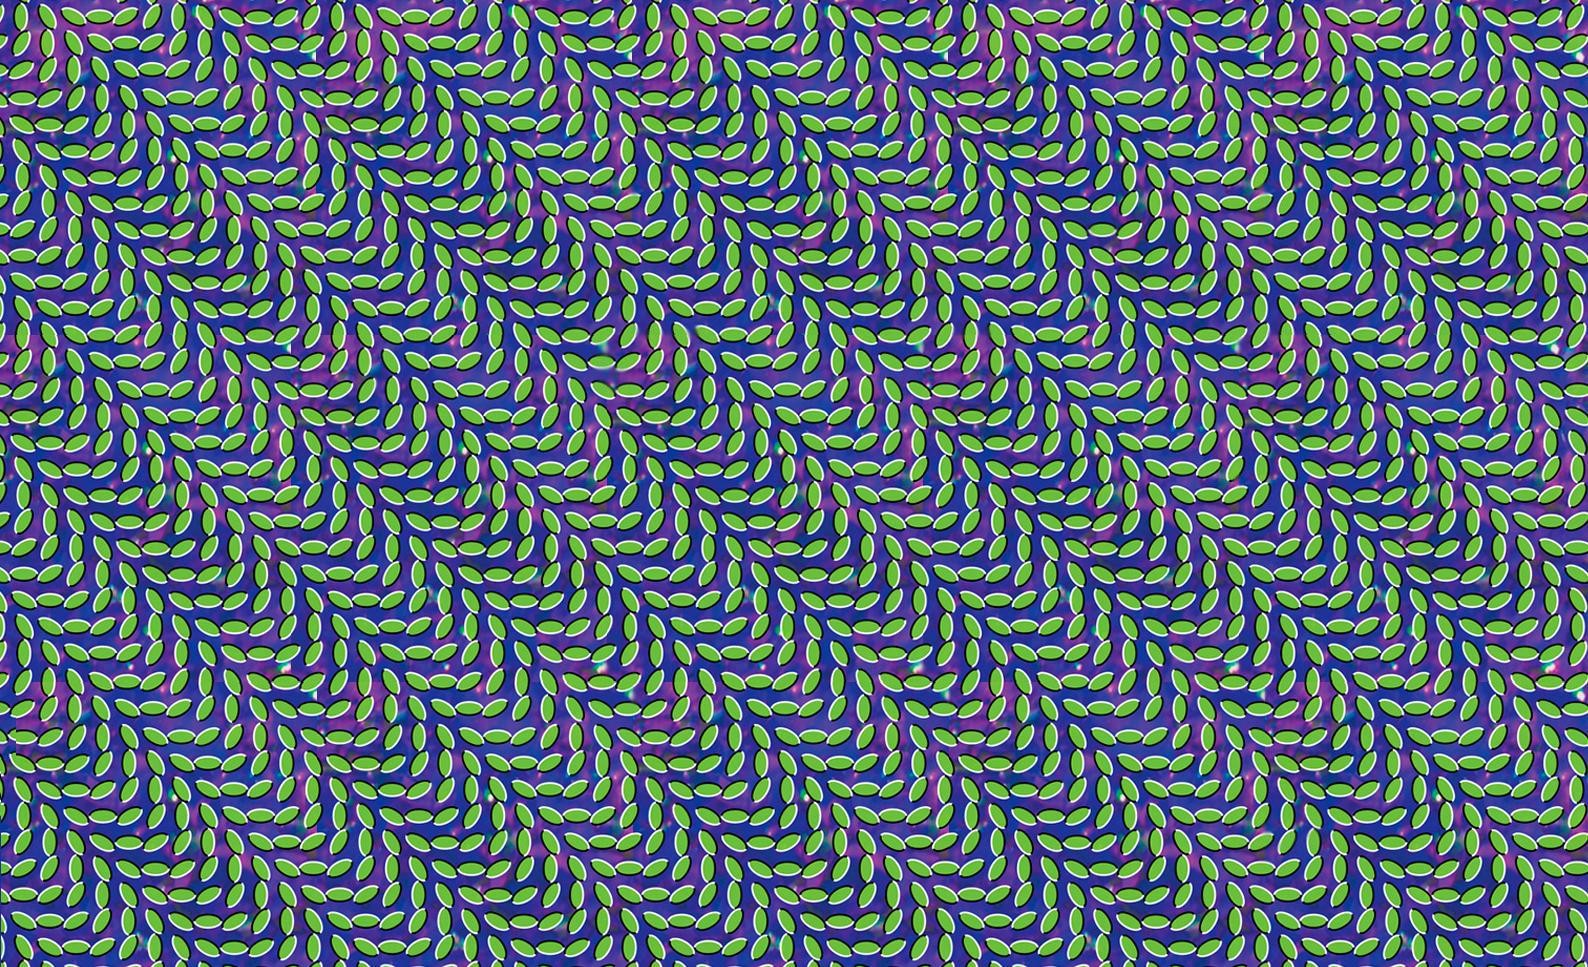 Optical Illusion Pattern Abstract Leaves Animal Collective Merriweather Post Pavilion 1588x967